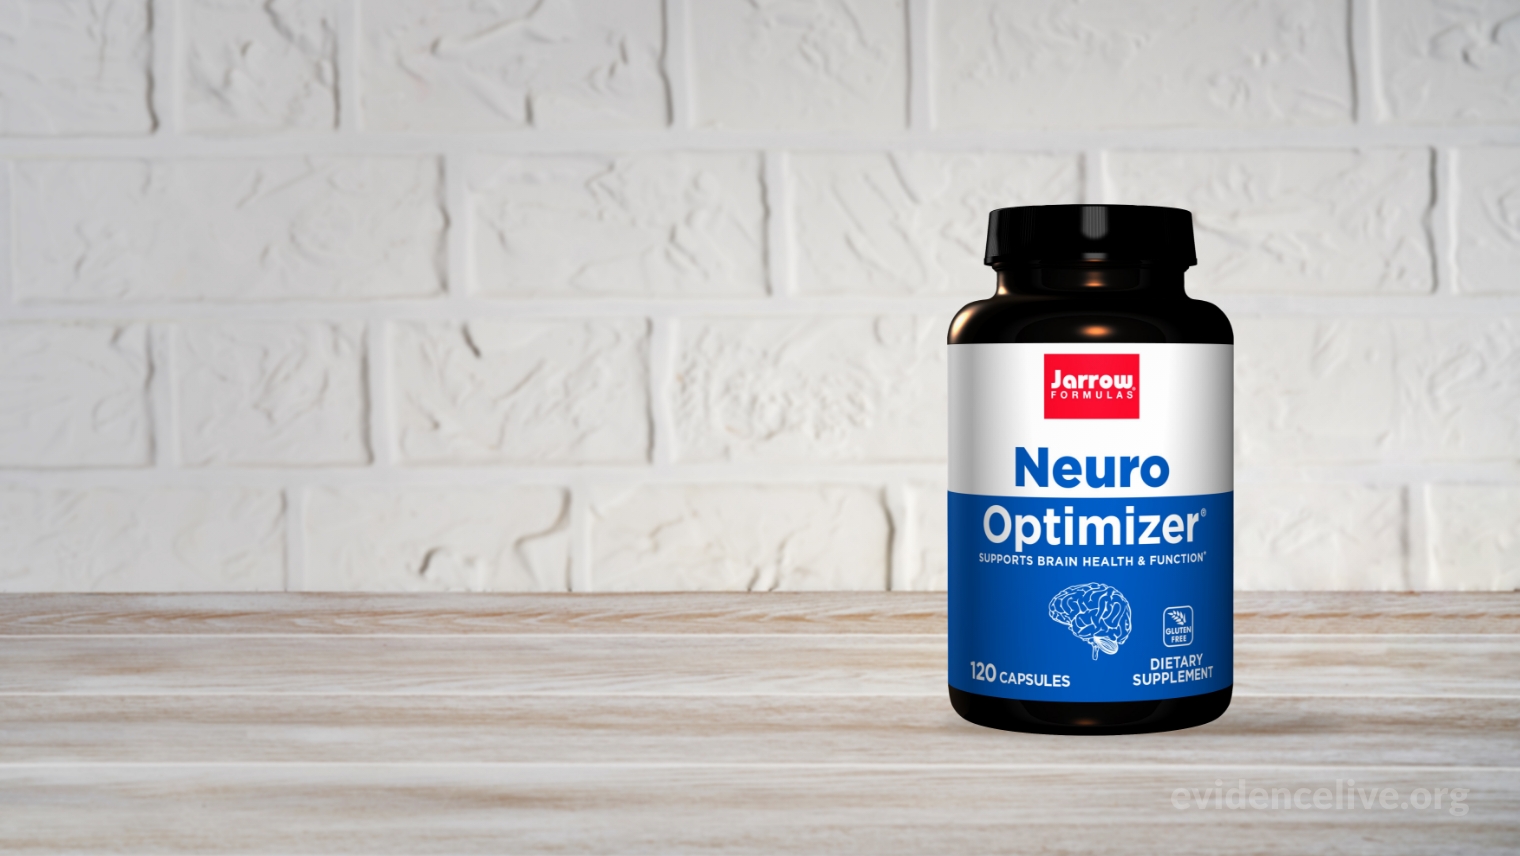 What is Neuro Optimizer